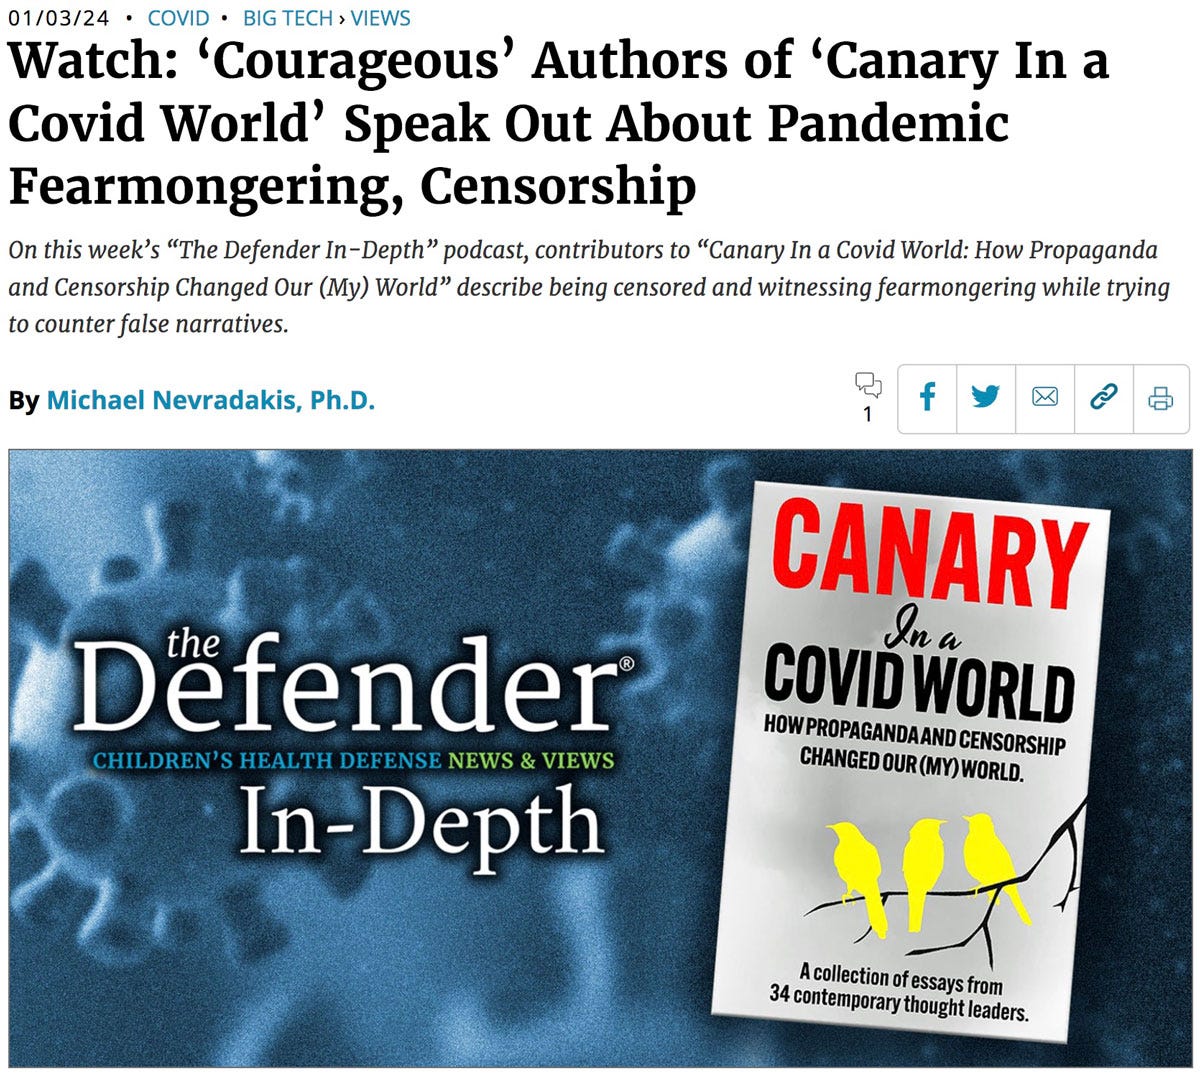 Defender Podcast Article: Canary in a COVID World Podcast